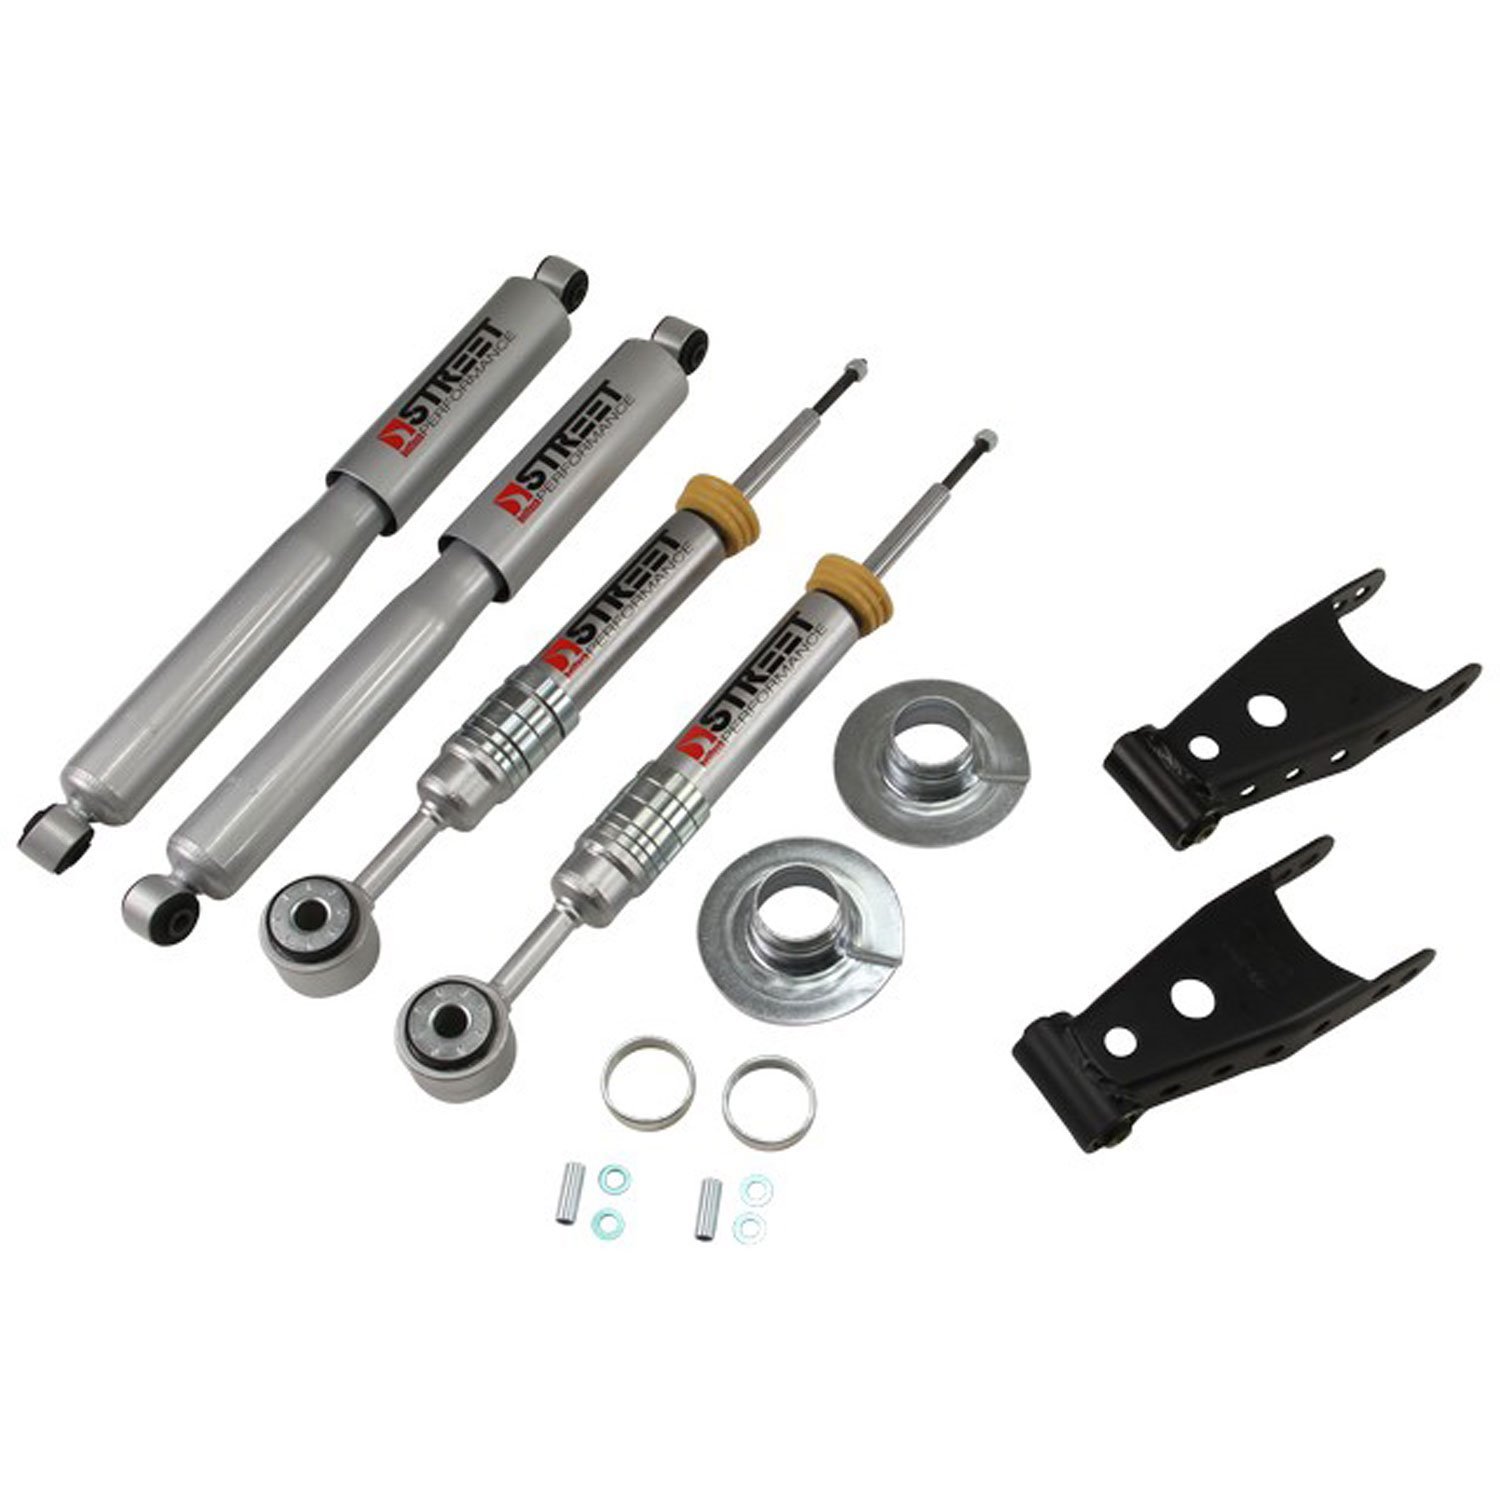 Complete Lowering Kit for 1999-2013 Ford F-150